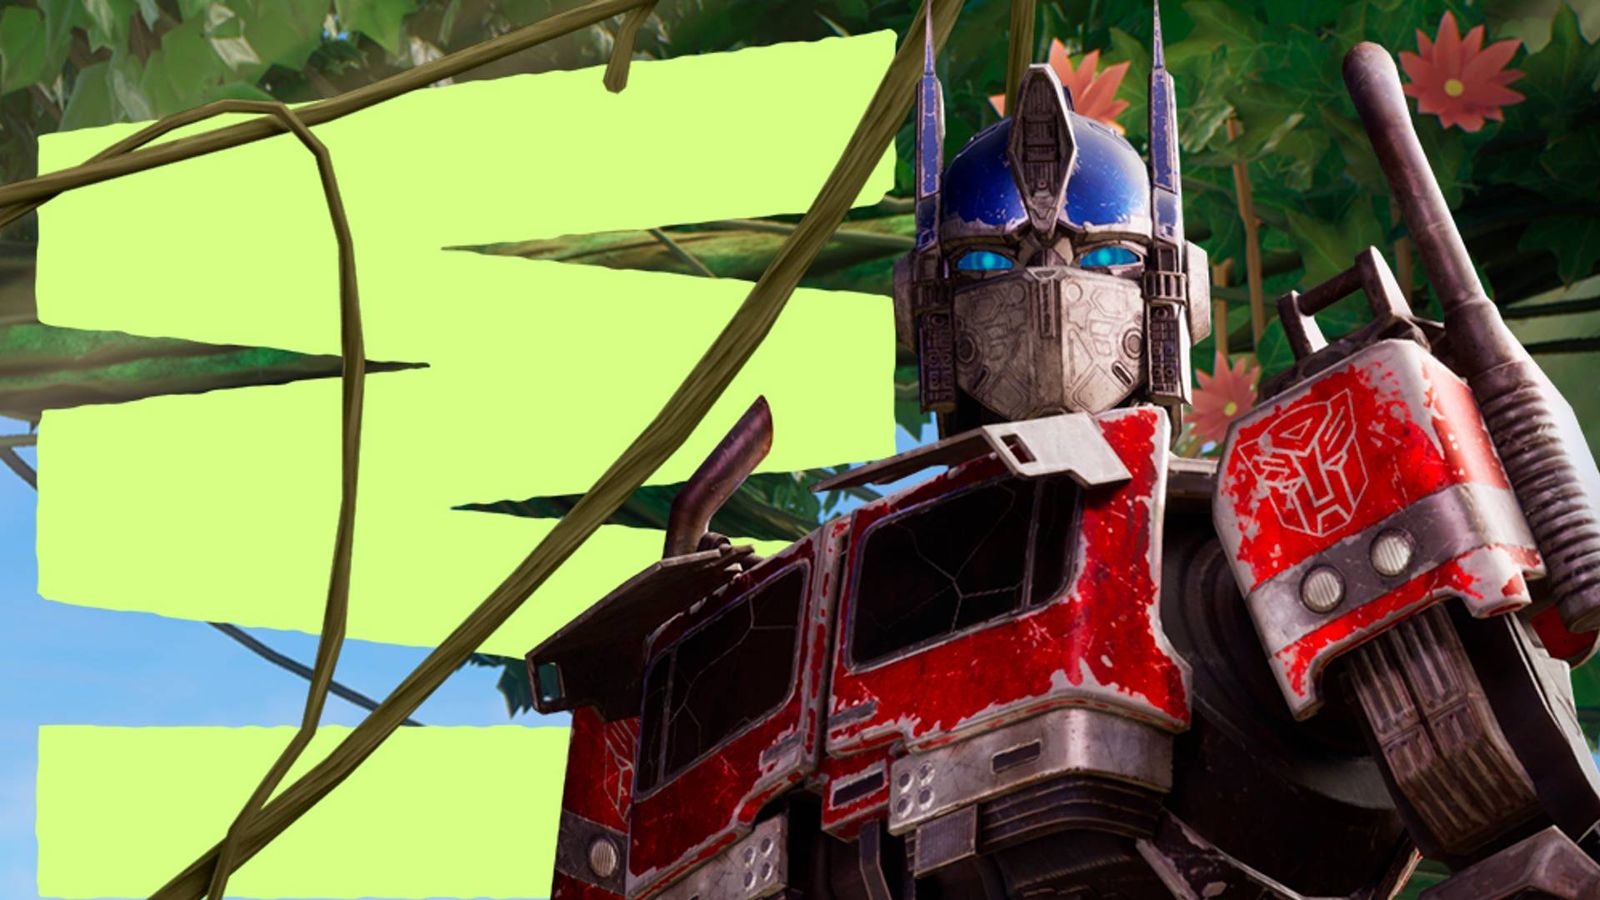 The Optimus Prime Fortnite skin from a promotional image.